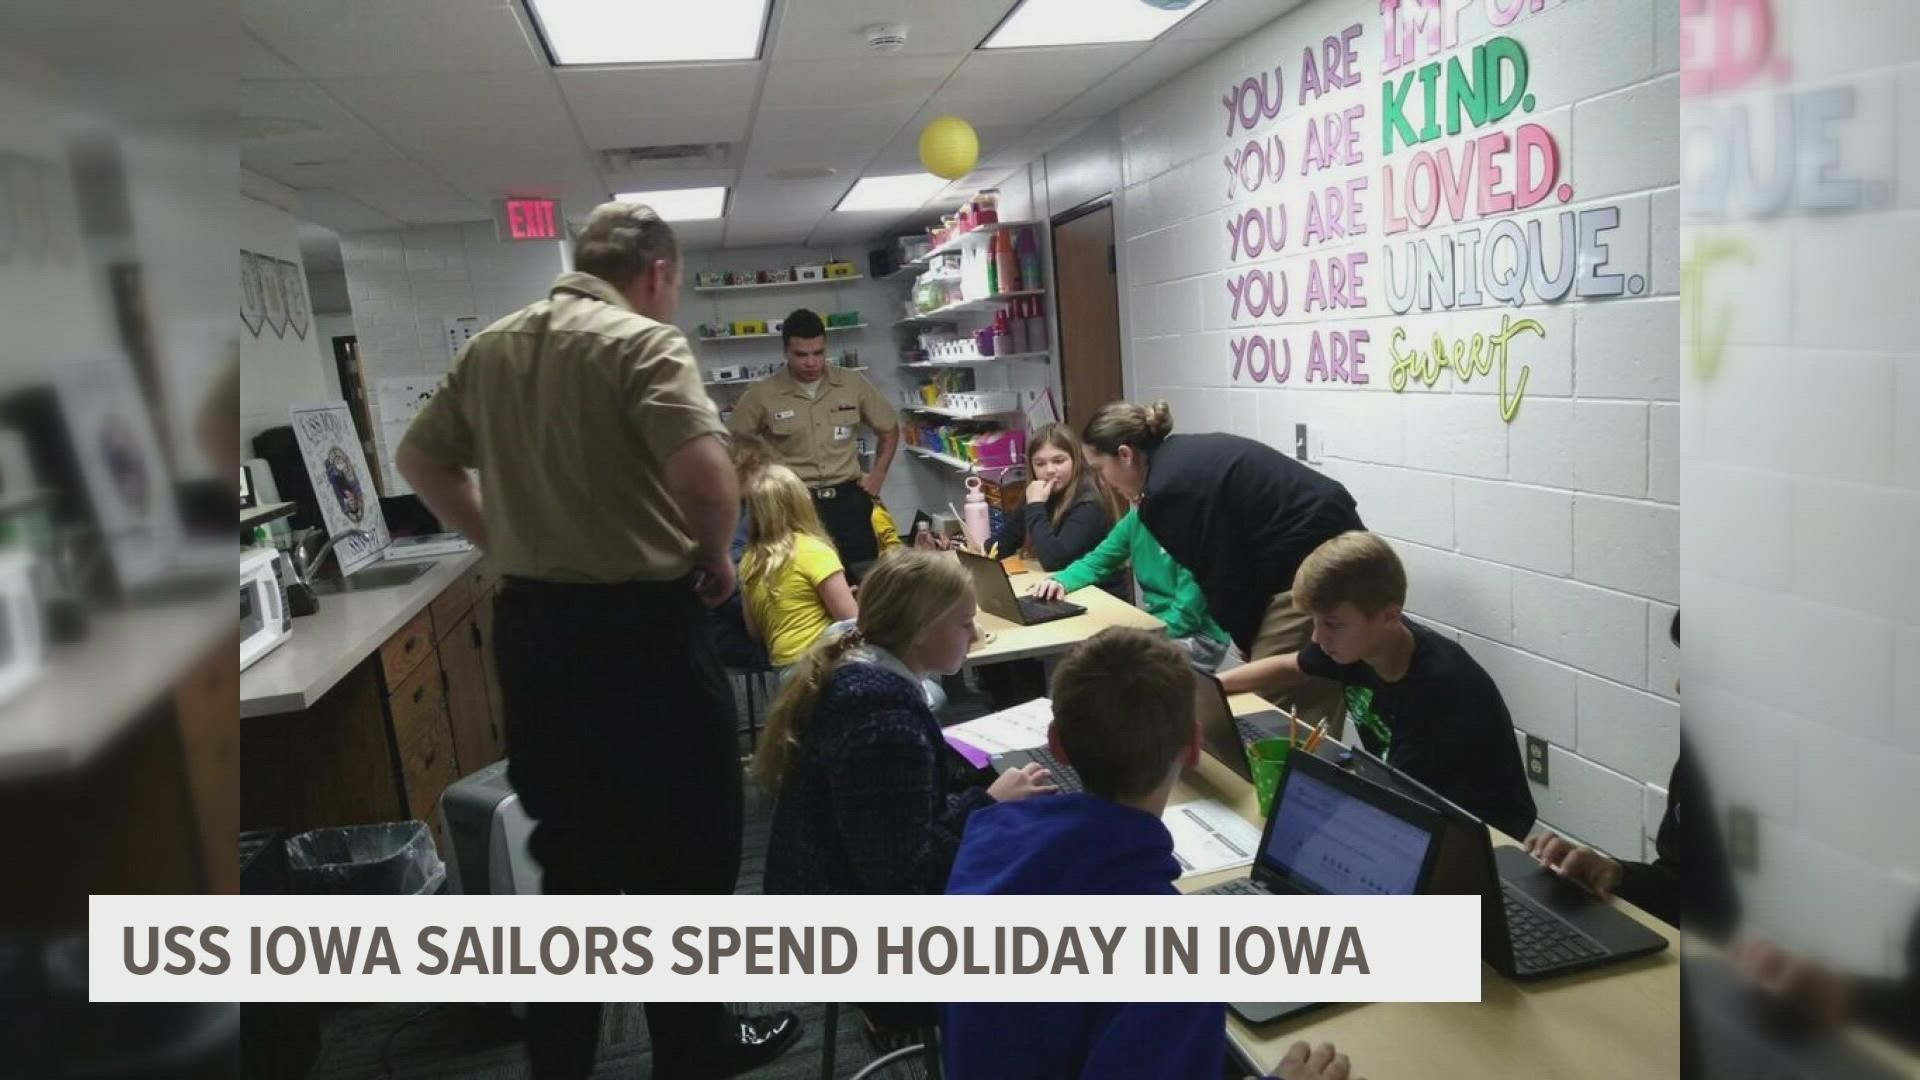 During their weeklong trip, the sailors are building relationships with Iowans before they ship out on the battleship named for the state.